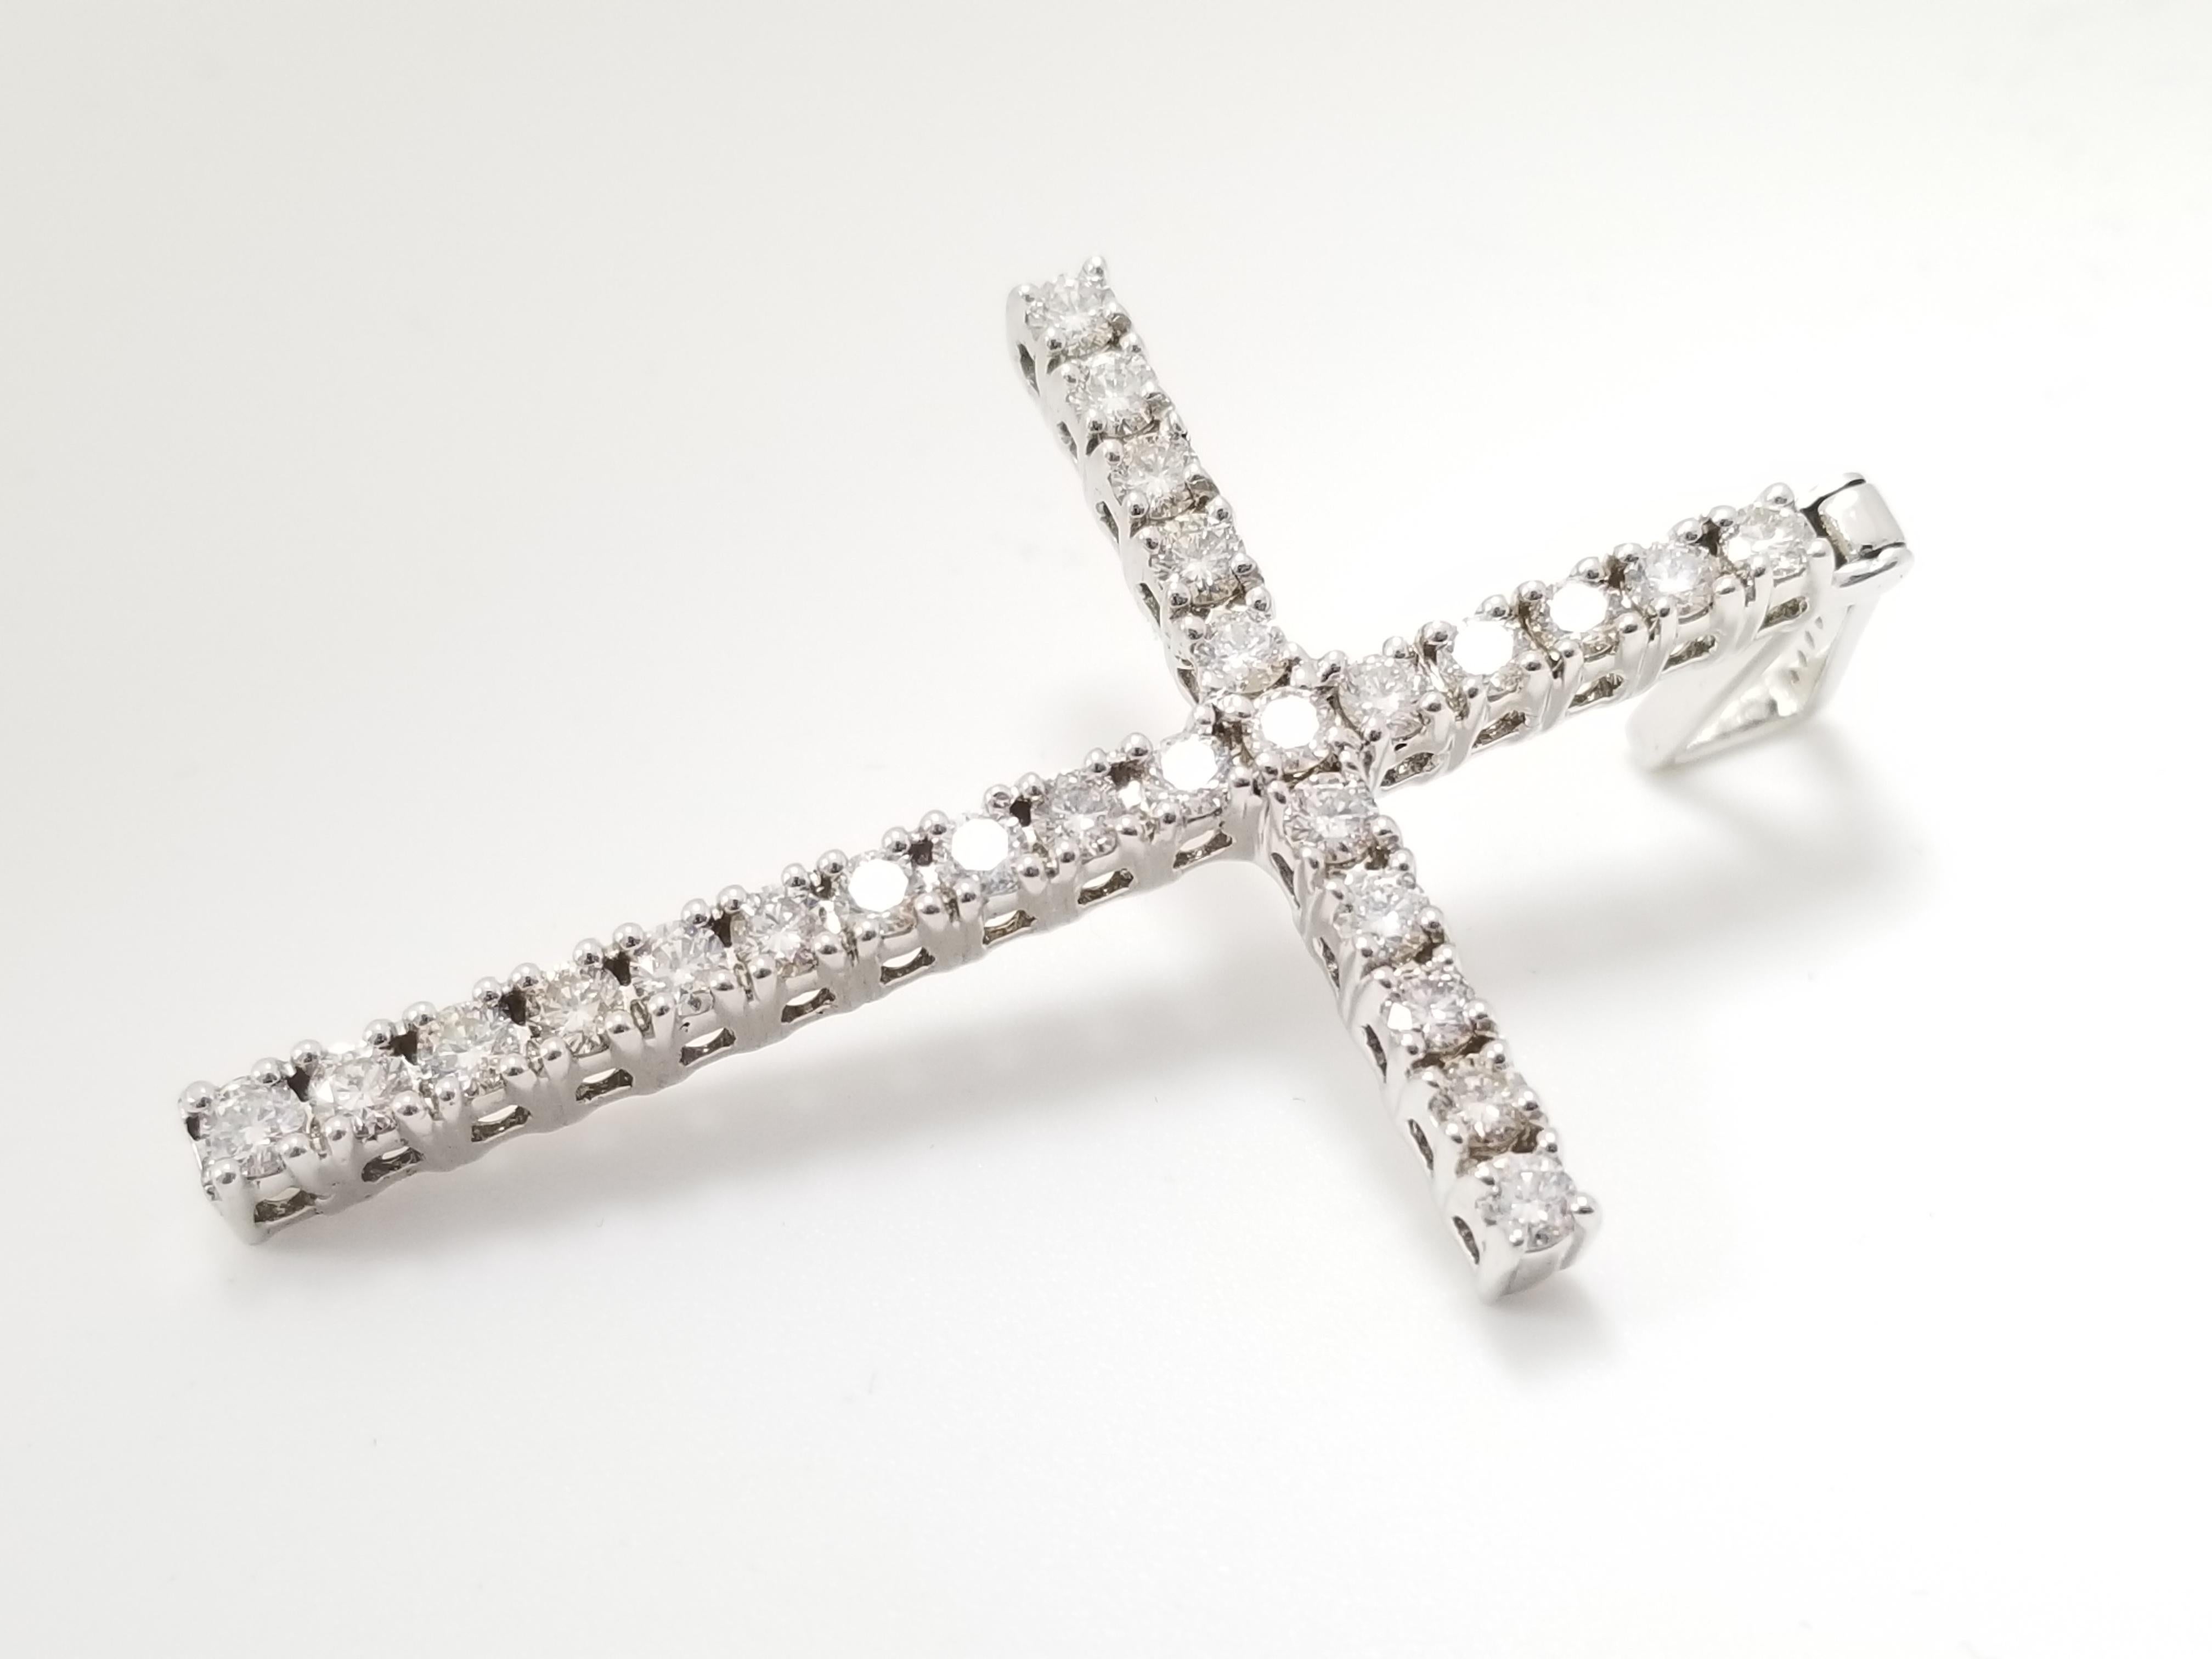 Beautiful and Bold Natural Diamond Cross Pendant White Gold 14K. A total weight of 2.45 cttw natural round cut diamonds very sparkly and shiny look.
Measurements: 2.5 inch Length x 1.25 inch Width
Average Color/Clarity: H-VS